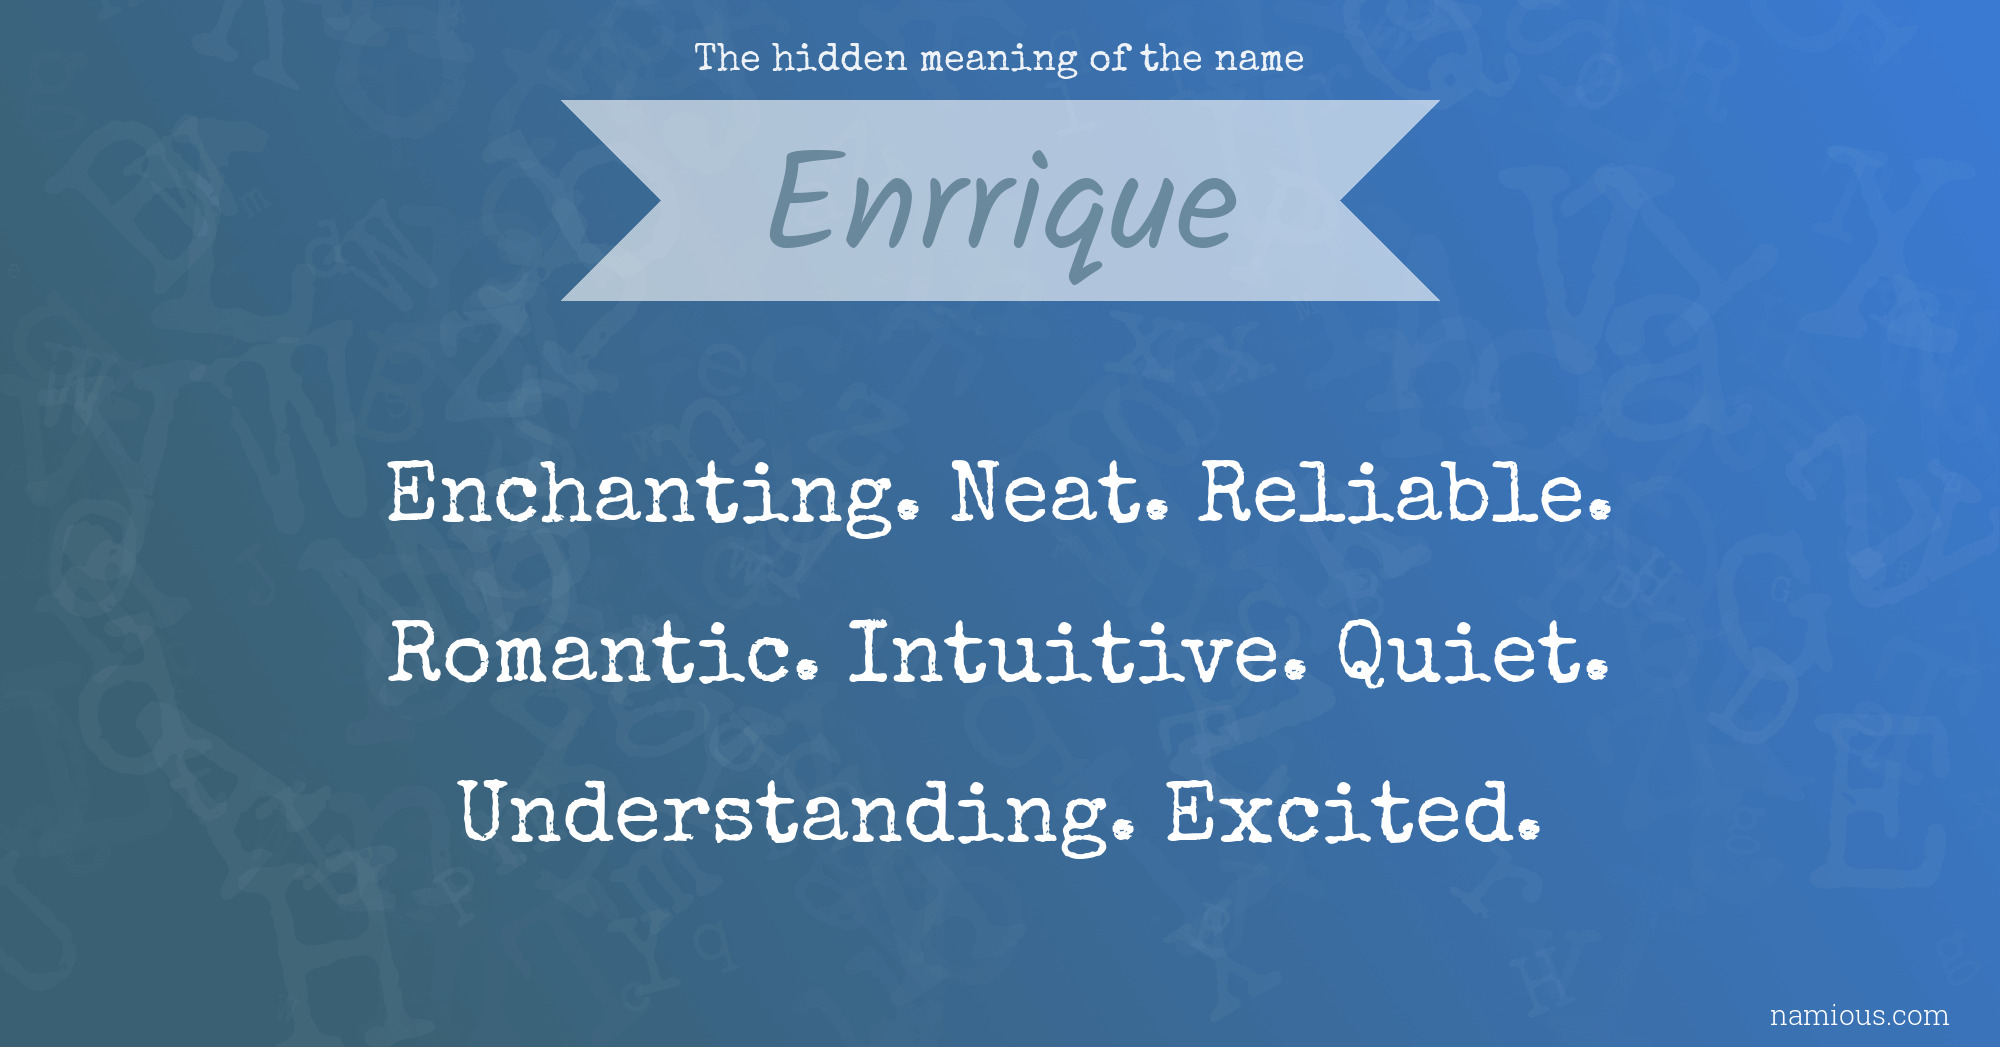 The hidden meaning of the name Enrrique